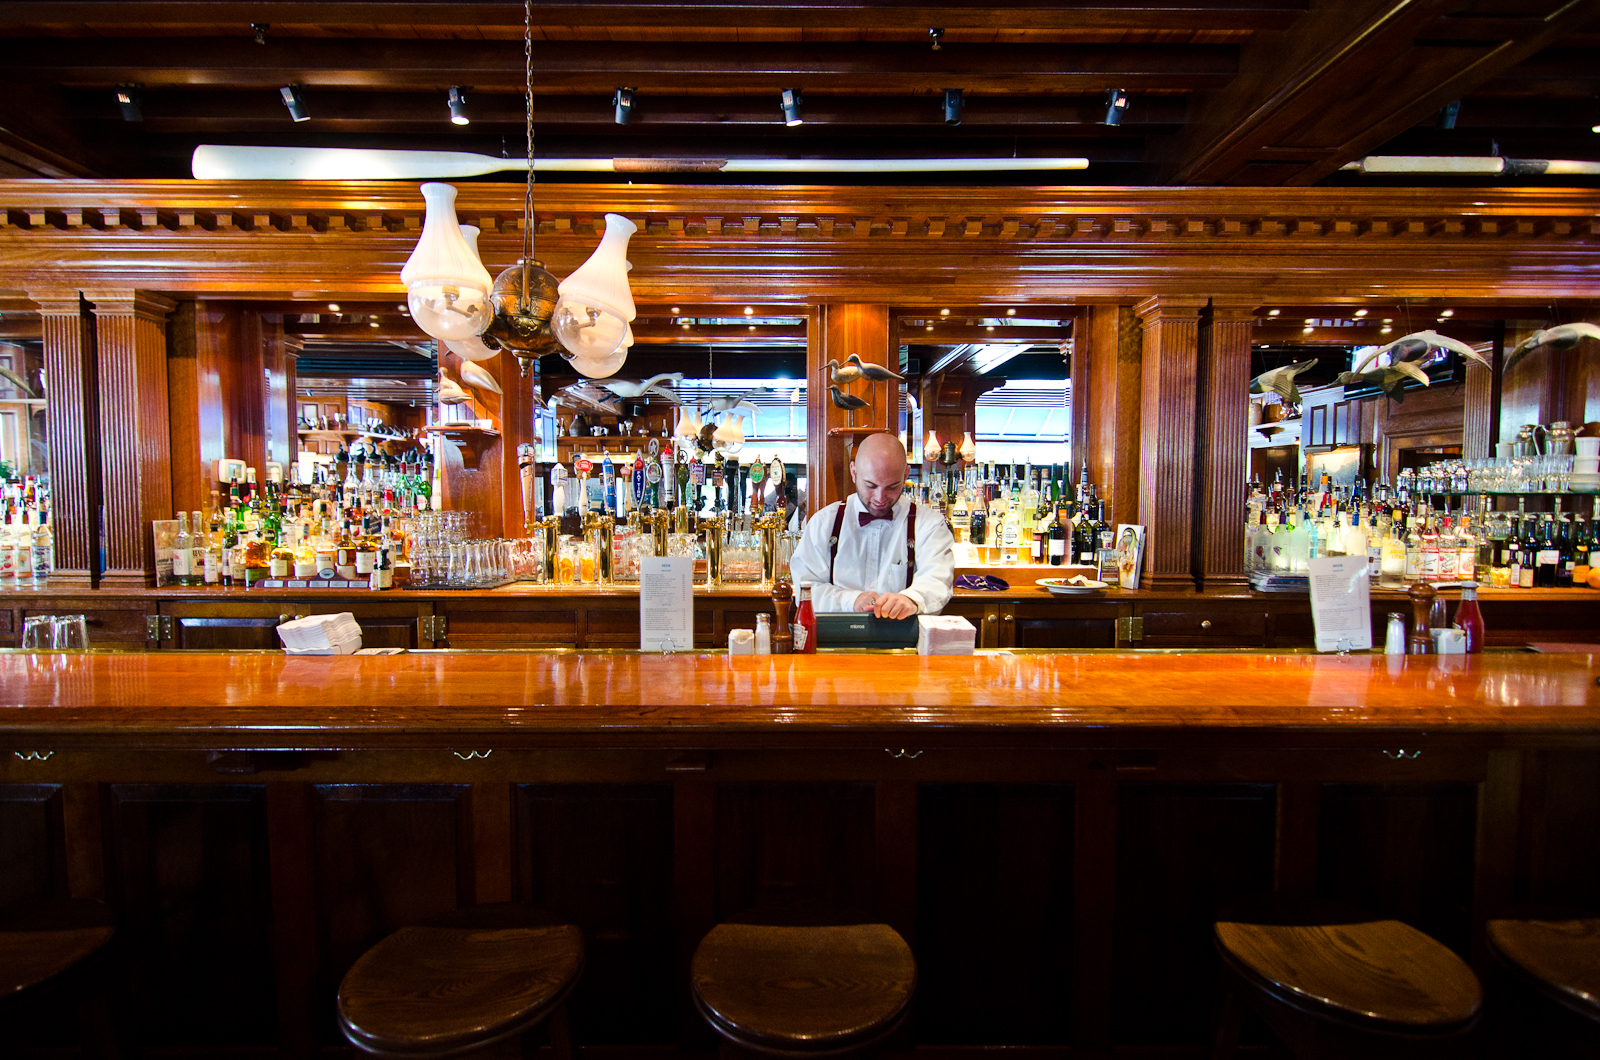 The wooden bar, with a bartender in suspenders